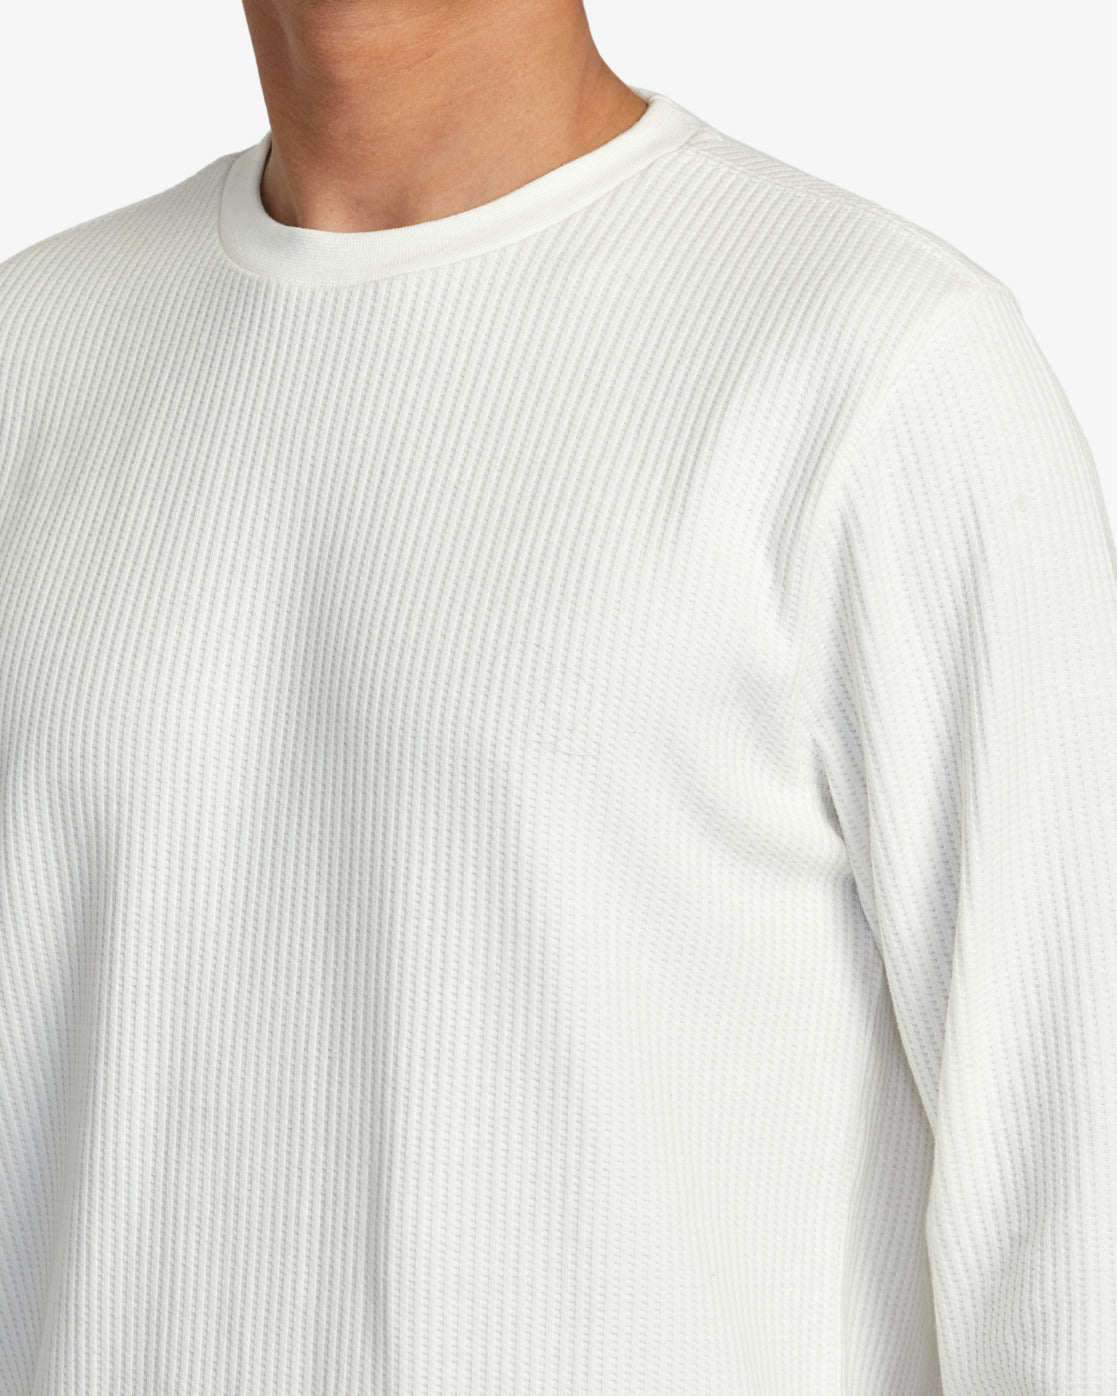 RVCA Day Shift Thermal LS Shirt - Off White Mens Longsleeve Tee